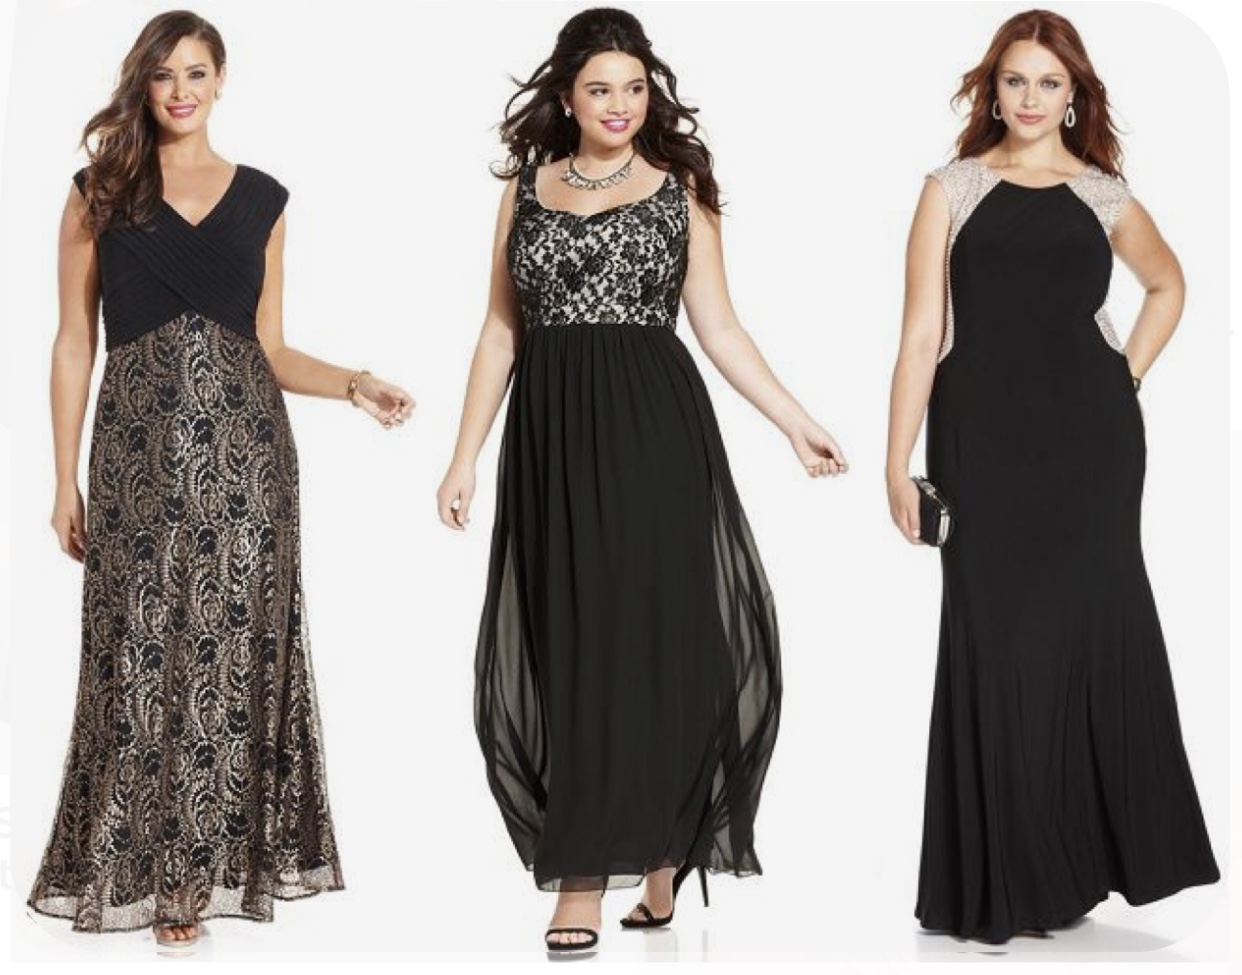 Plus Size Formal Dresses For Weddings